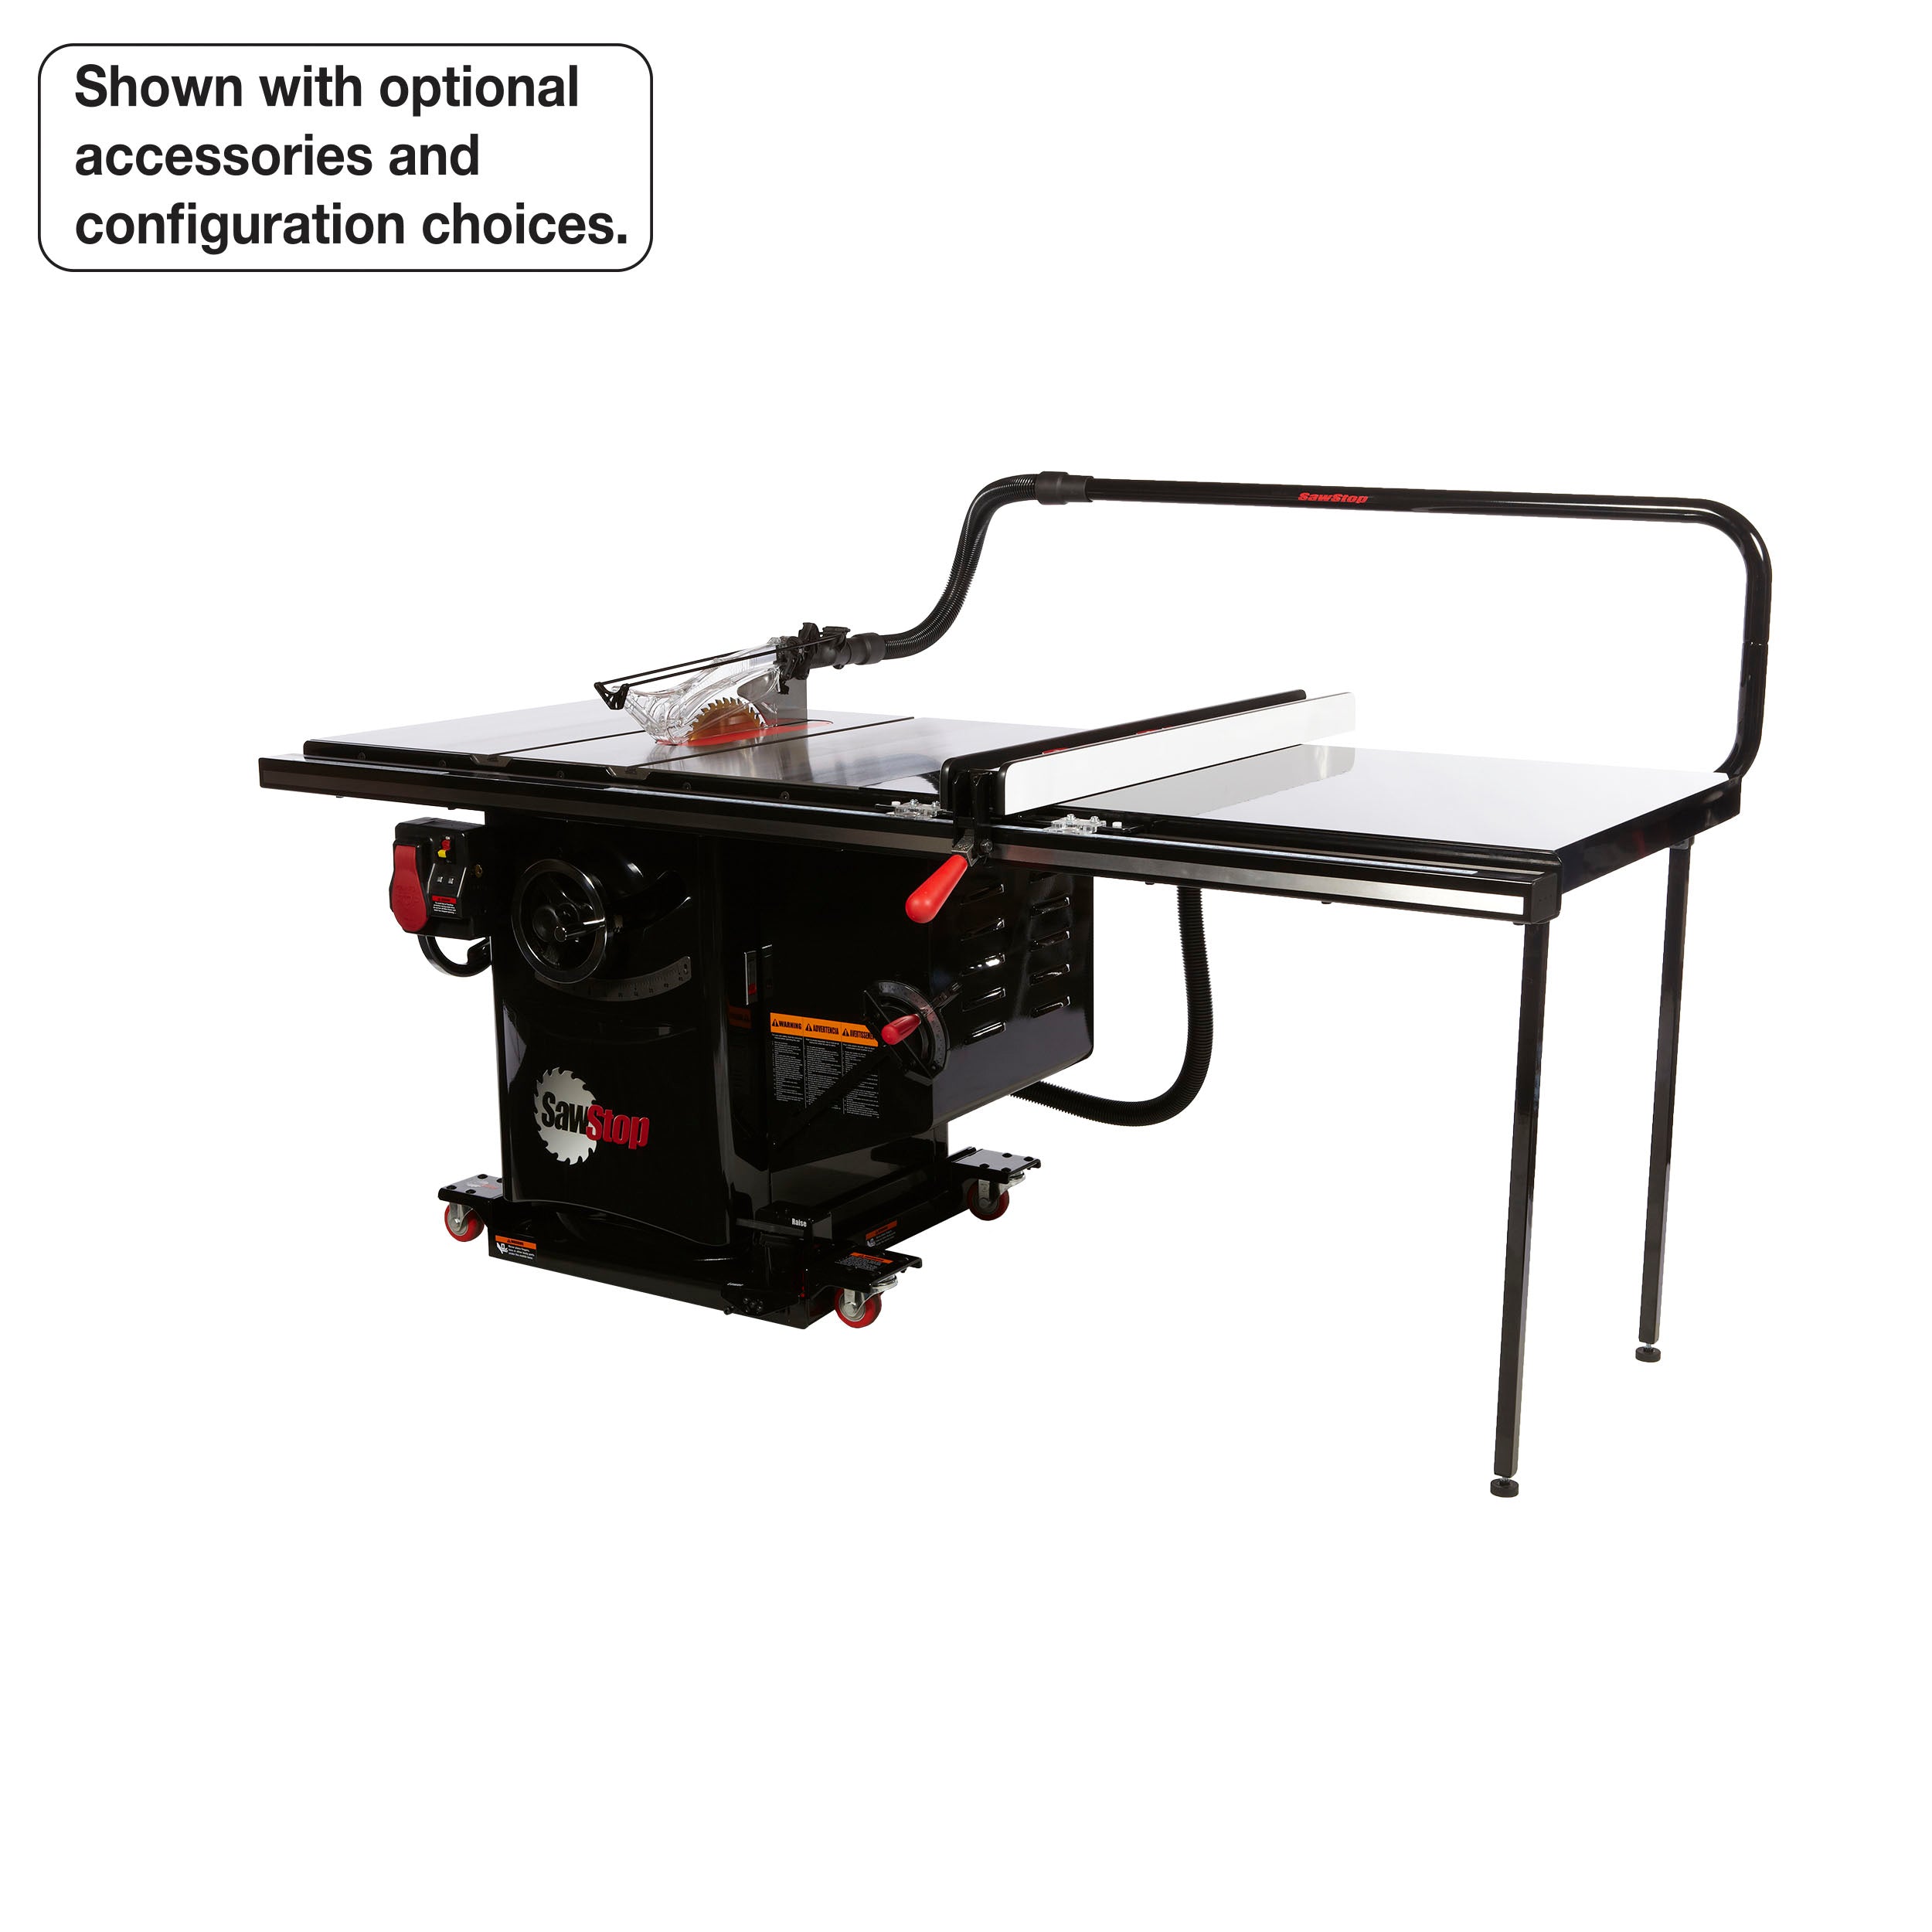 SawStop 7.5HP, 3ph, 230v Industrial Cabinet Saw w/ 36